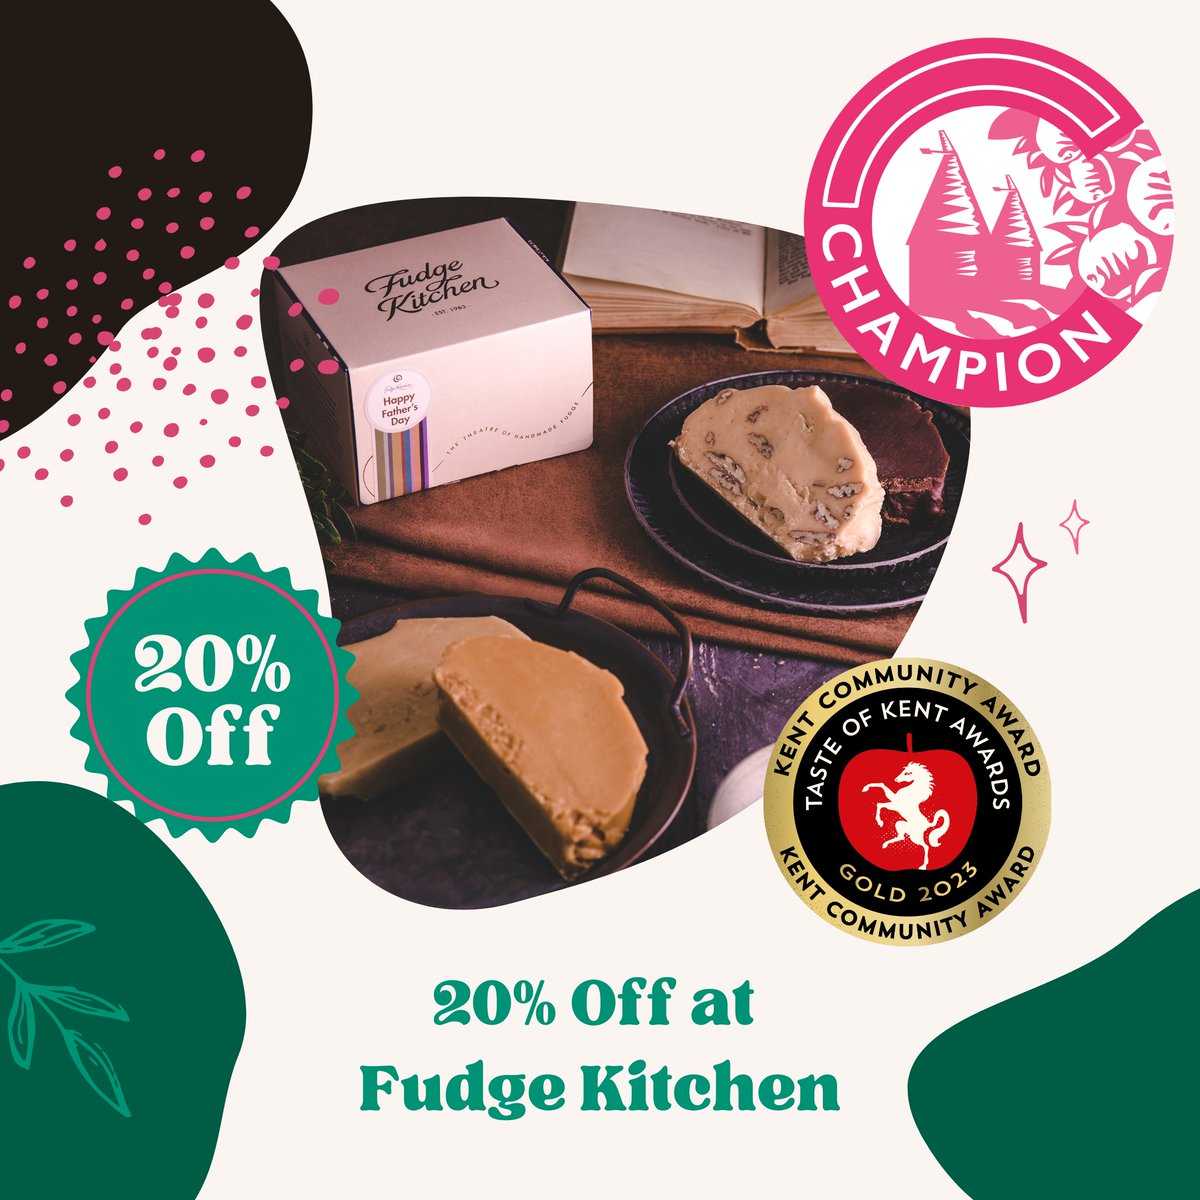 Want to support Kent businesses and get quarterly deal drops straight to your inbox for just £25 per year? Become a Produced in Kent Champion and get 20% off at the Taste of Kent award winning @fudgekitchen when you spend over £15 in store or online producedinkent.co.uk/champions